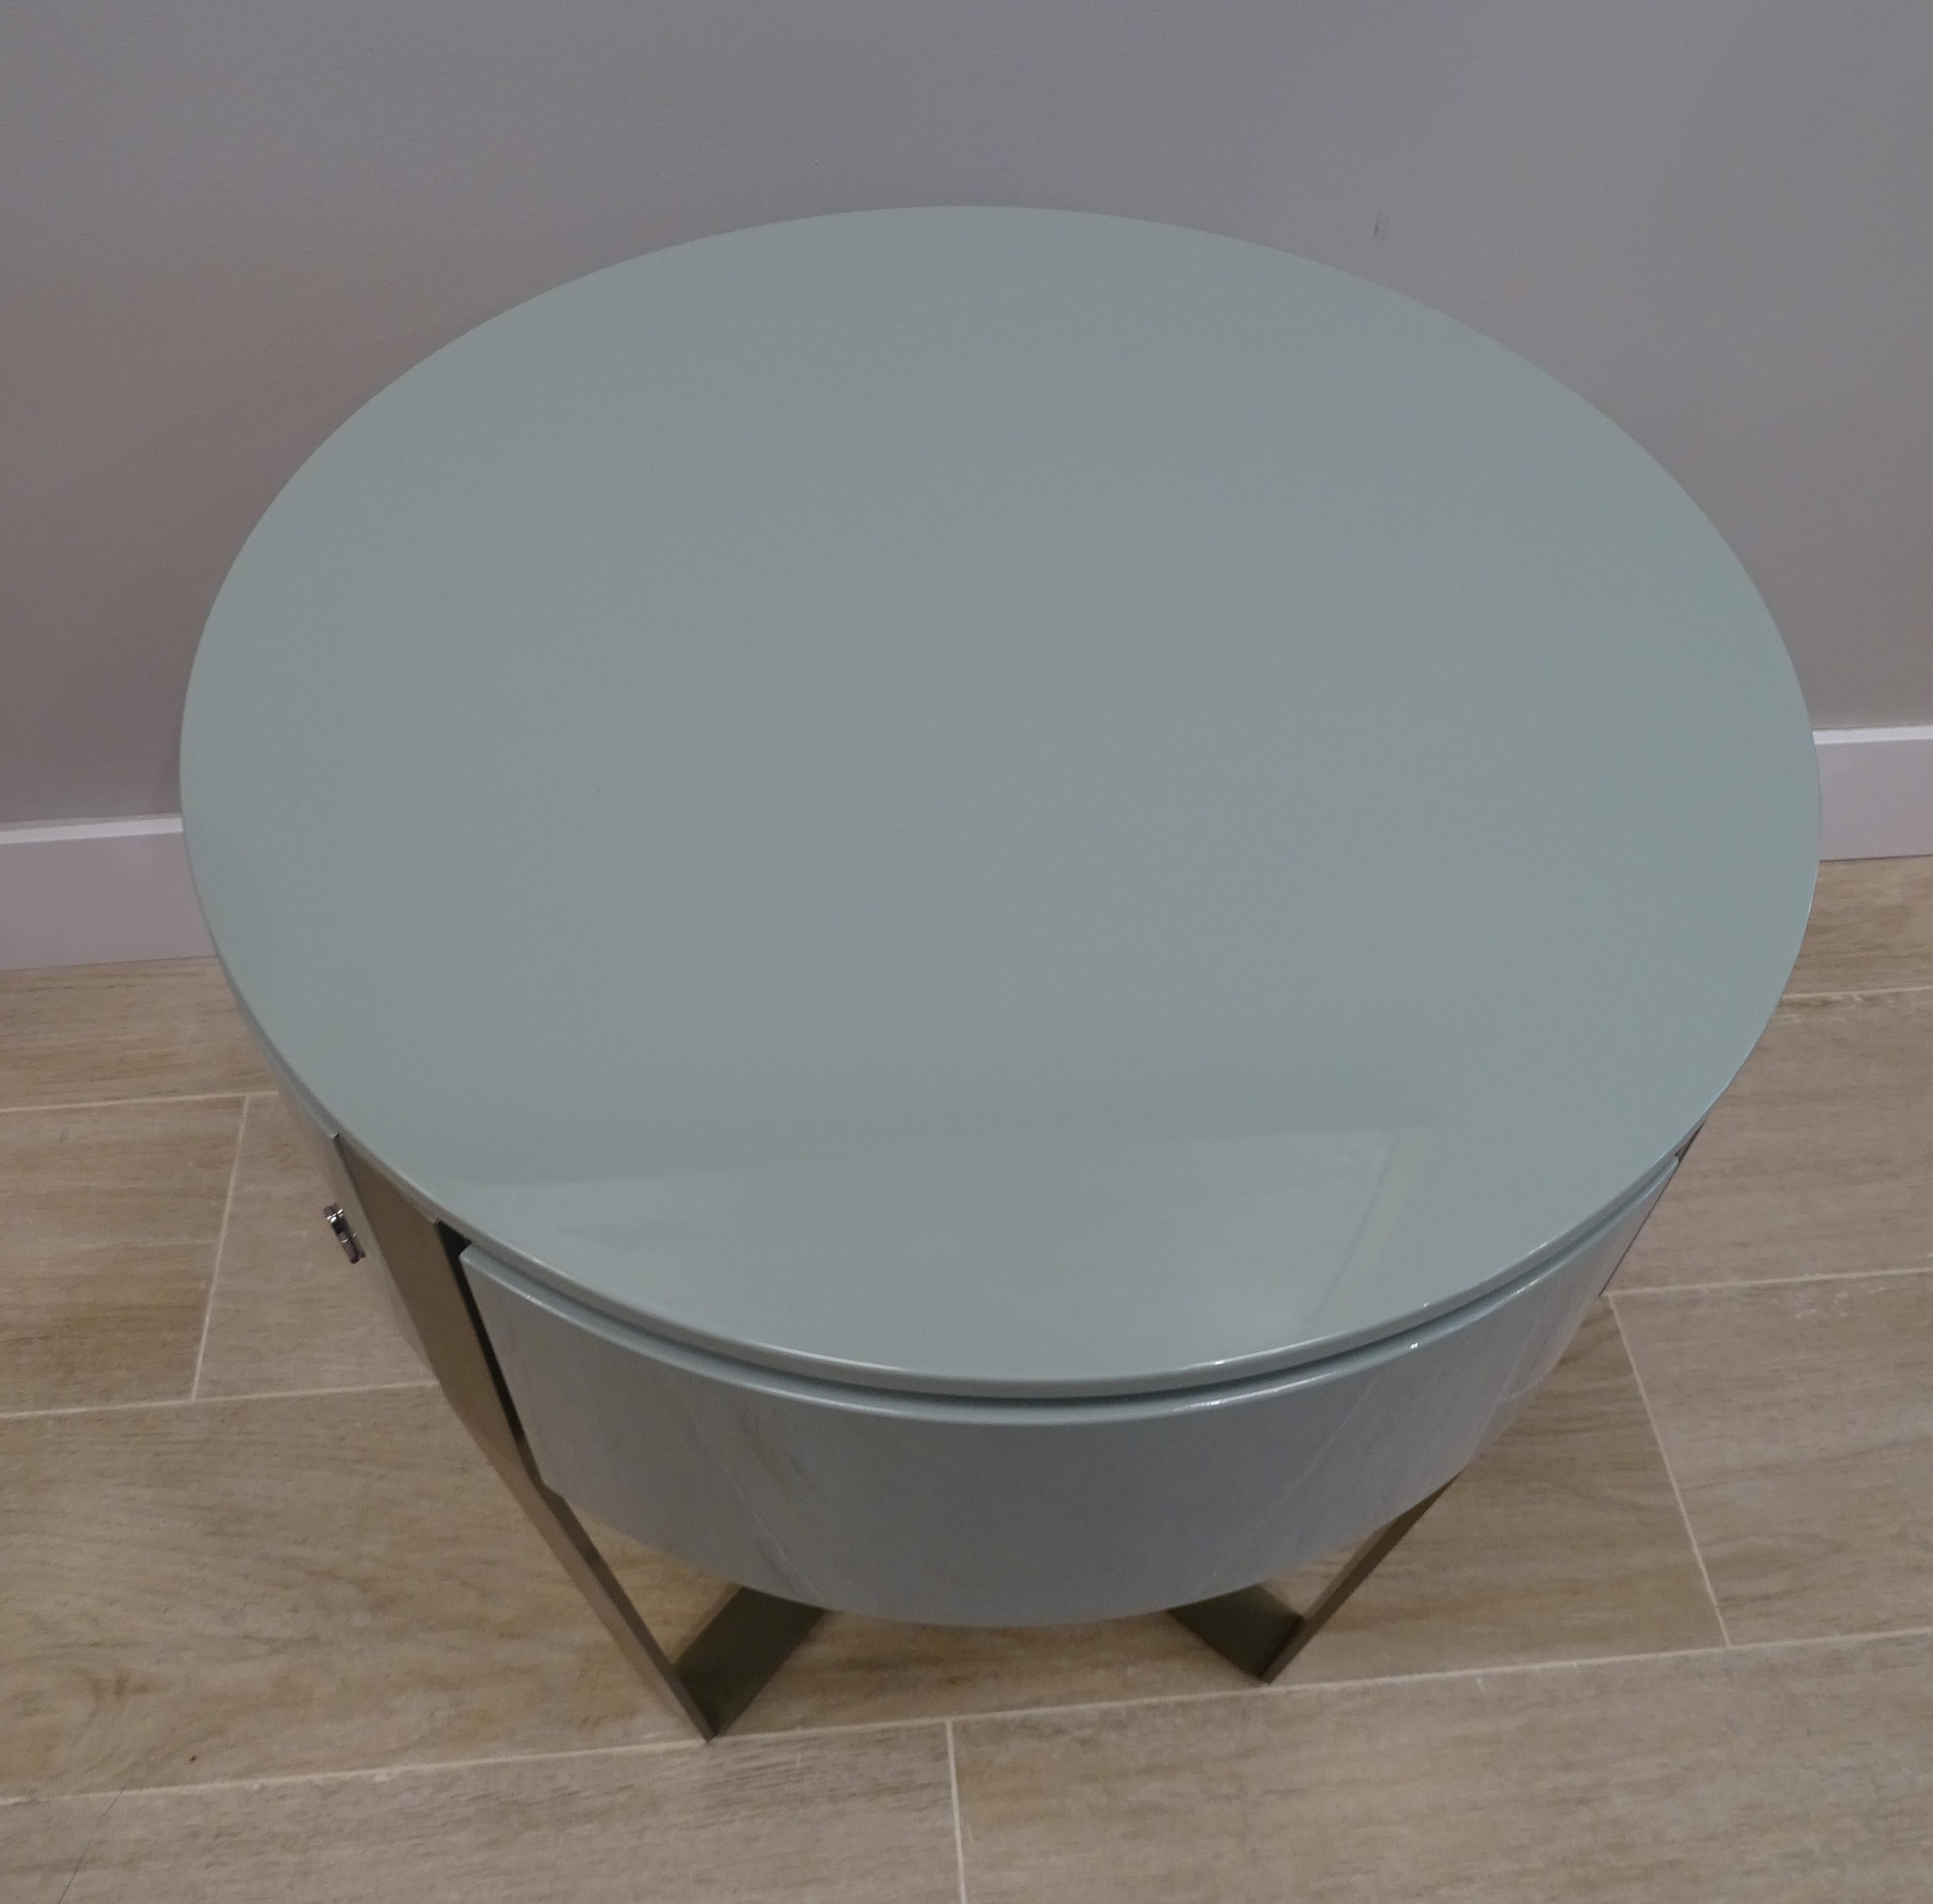 Hand-Crafted Natuzzi Italian Green Sidetable in Glossy Celadon Colour, One Drawer